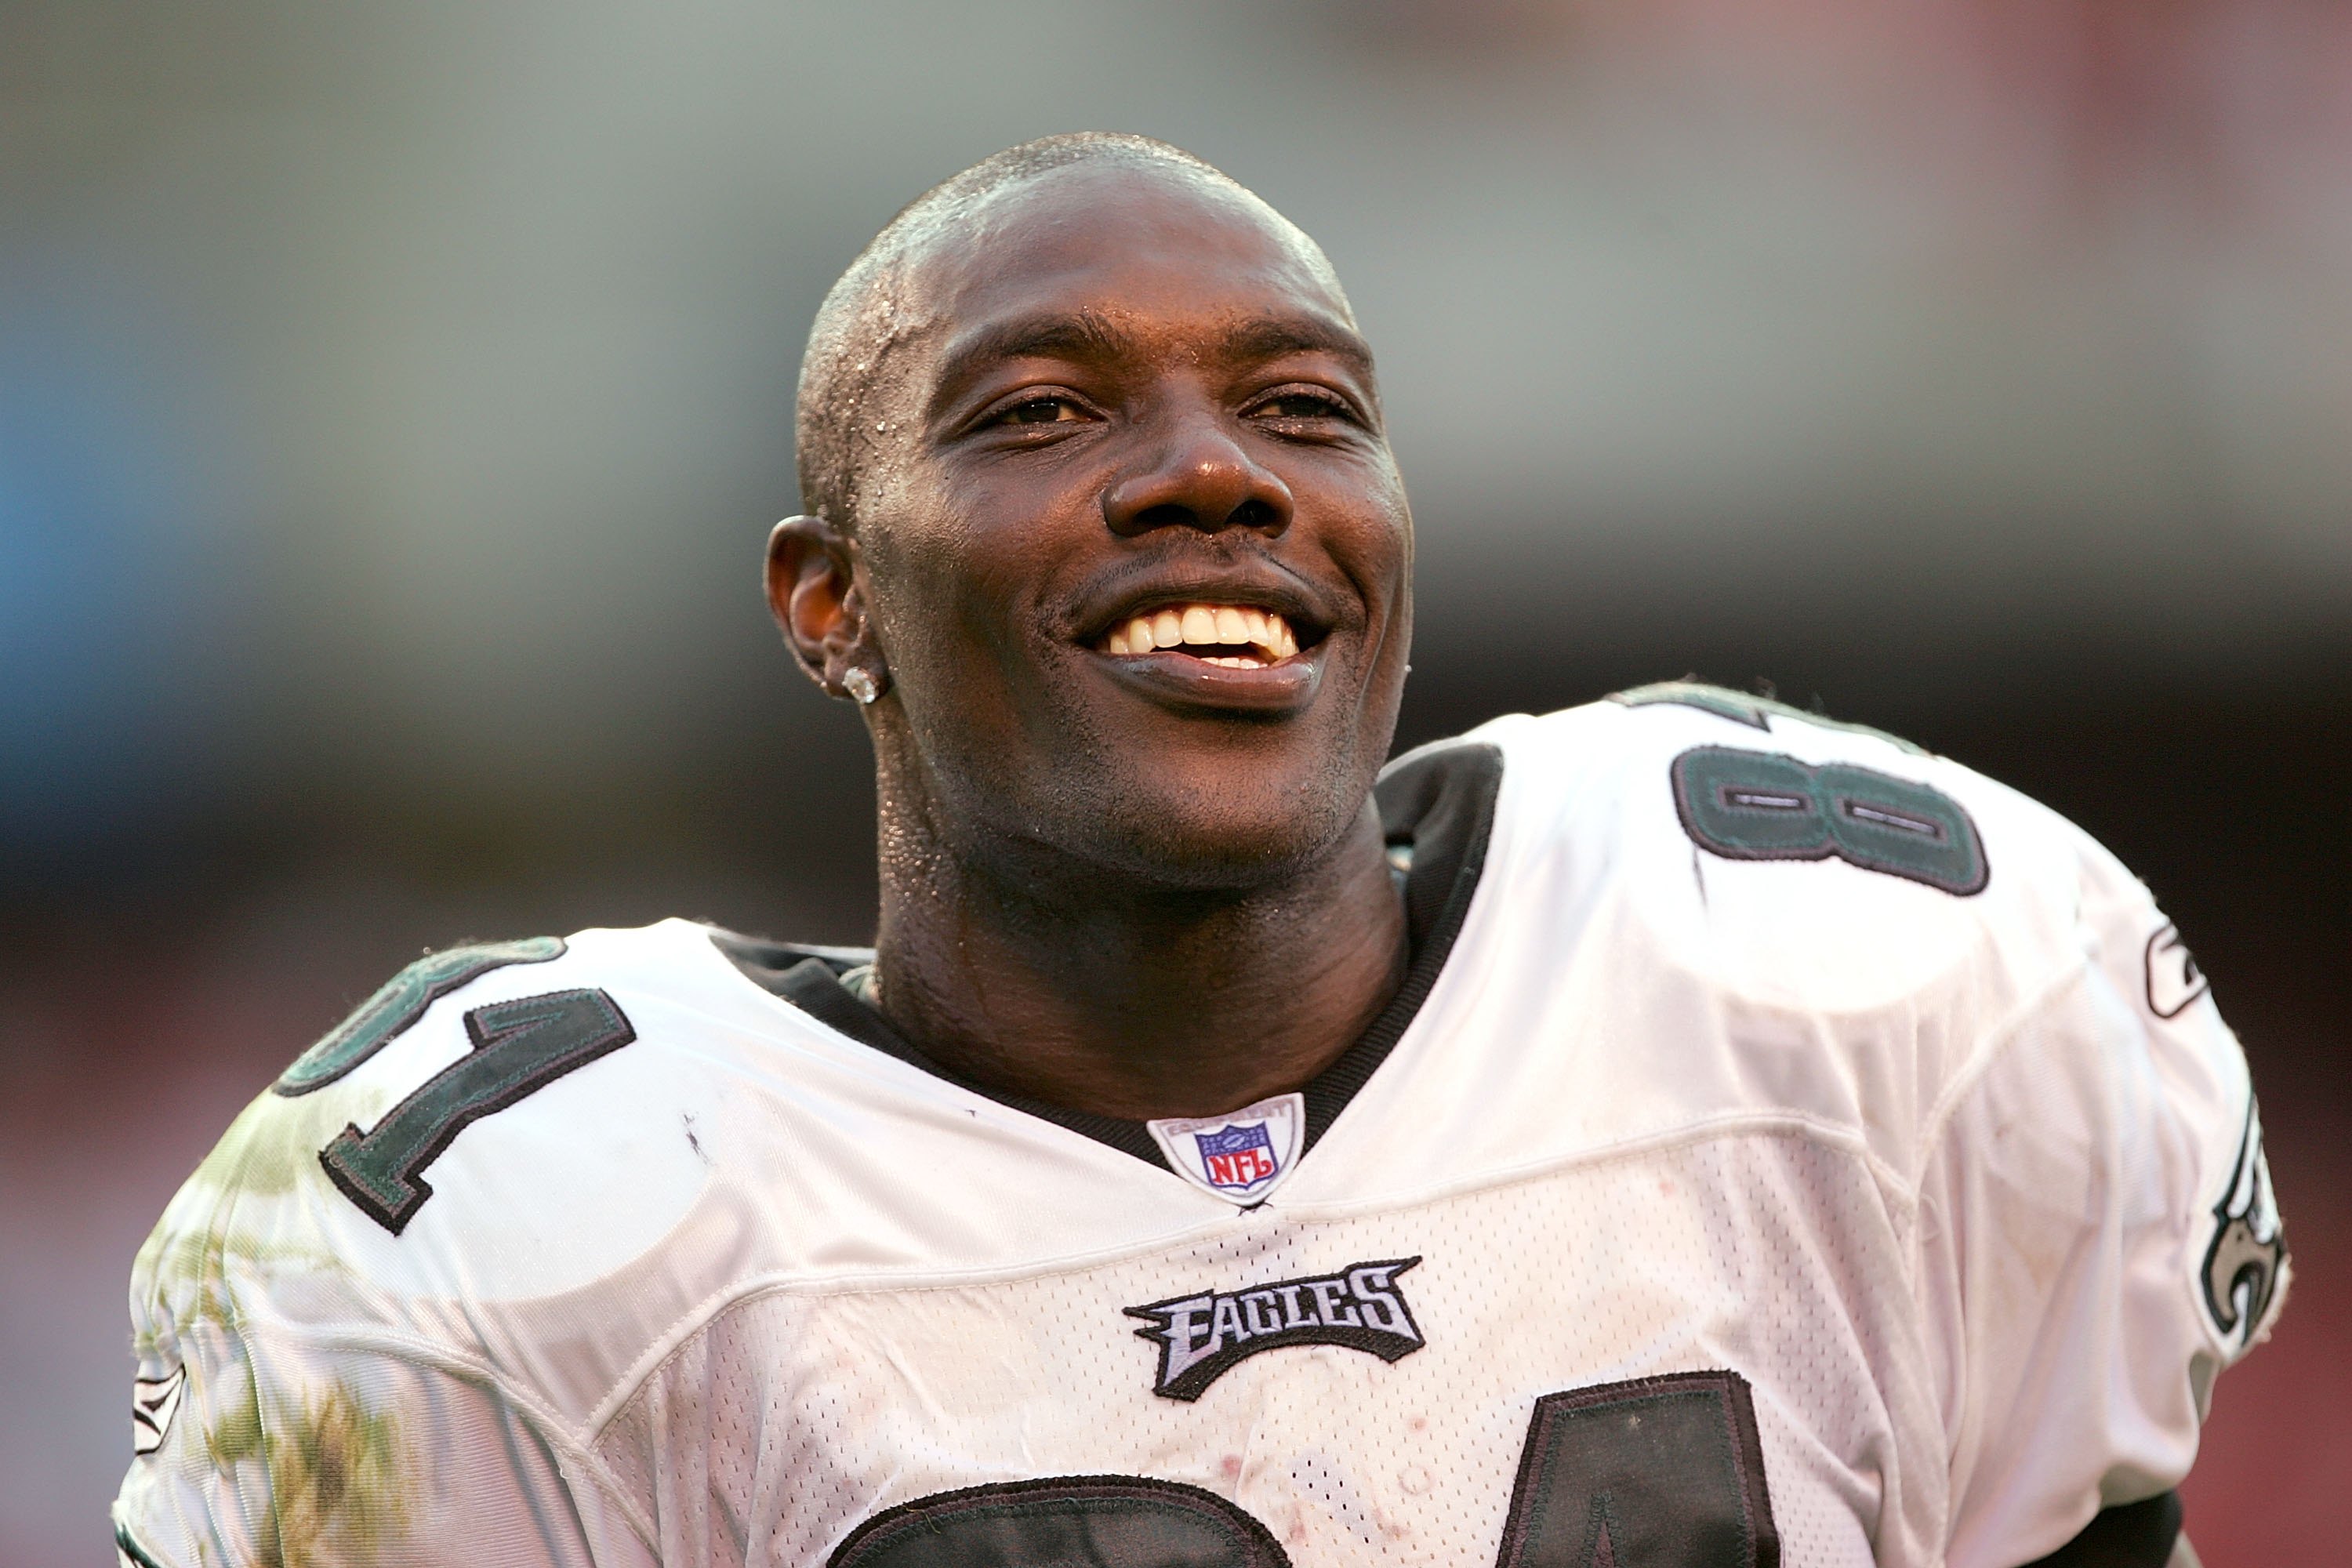 KANSAS CITY, MO - OCTOBER 2: (FILE PHOTO) Terrell Owens #81 of the Philadelphia Eagles smiles at the crowd during the second half of the game against the Kansas City Chiefs on October 2, 2005 at Arrowhead Stadium in Kansas City, Missouri.   (Photo by Jami